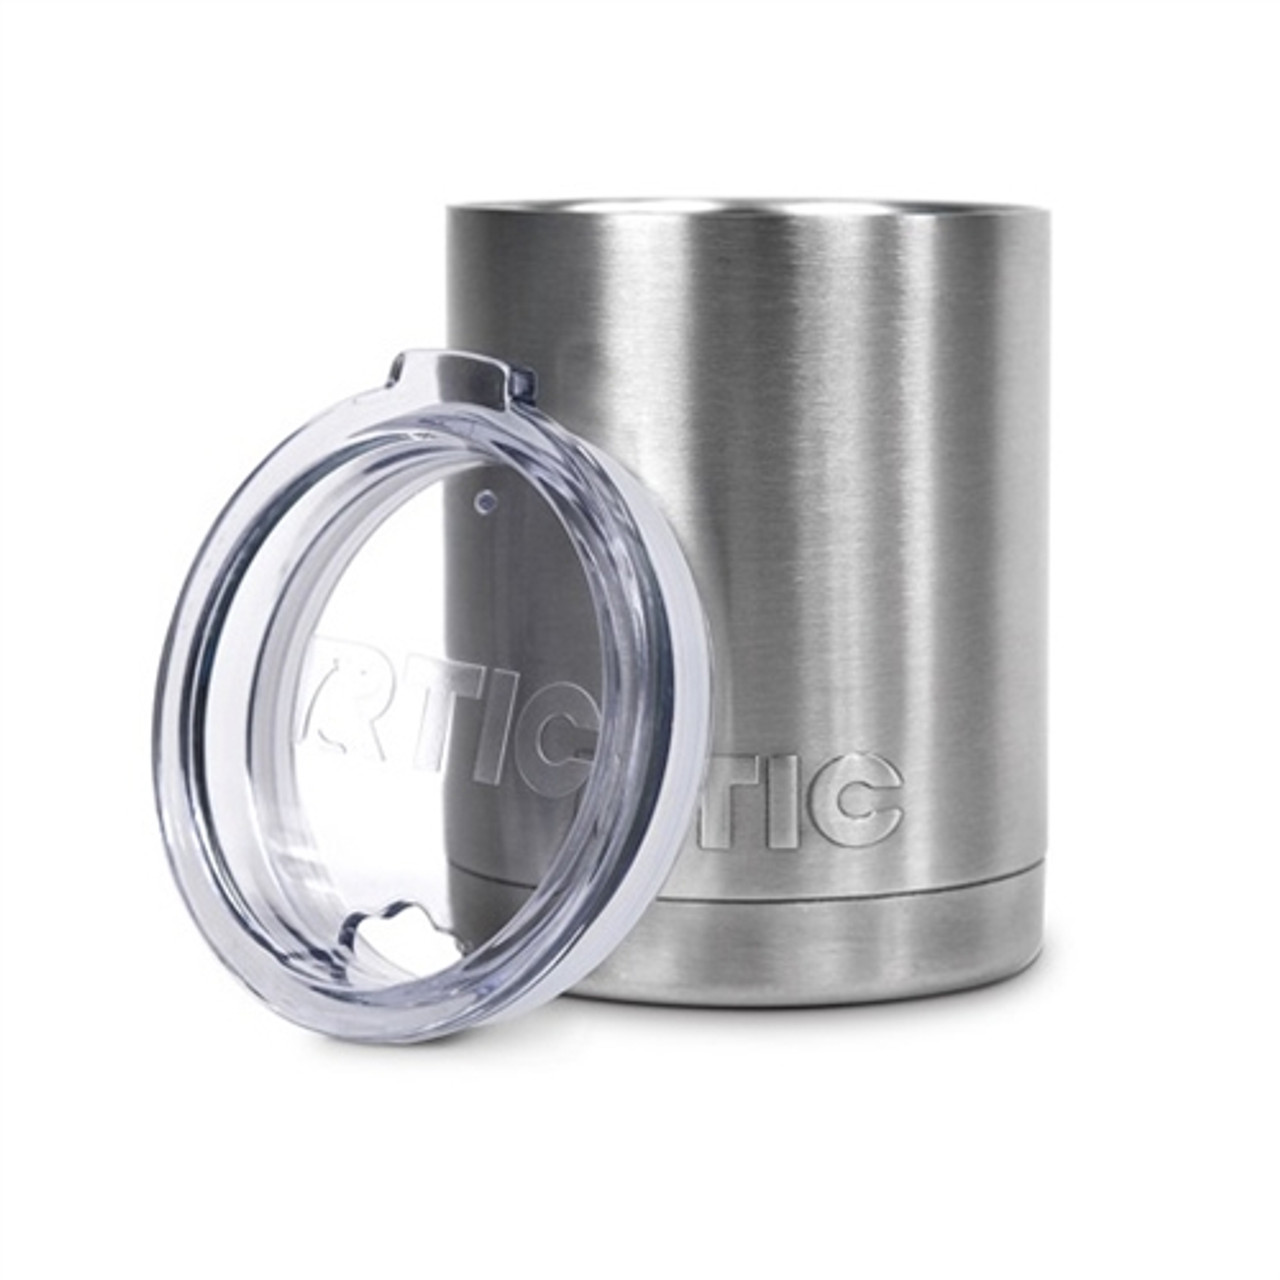 RTIC Tumbler Lowball Cup 10oz Silver